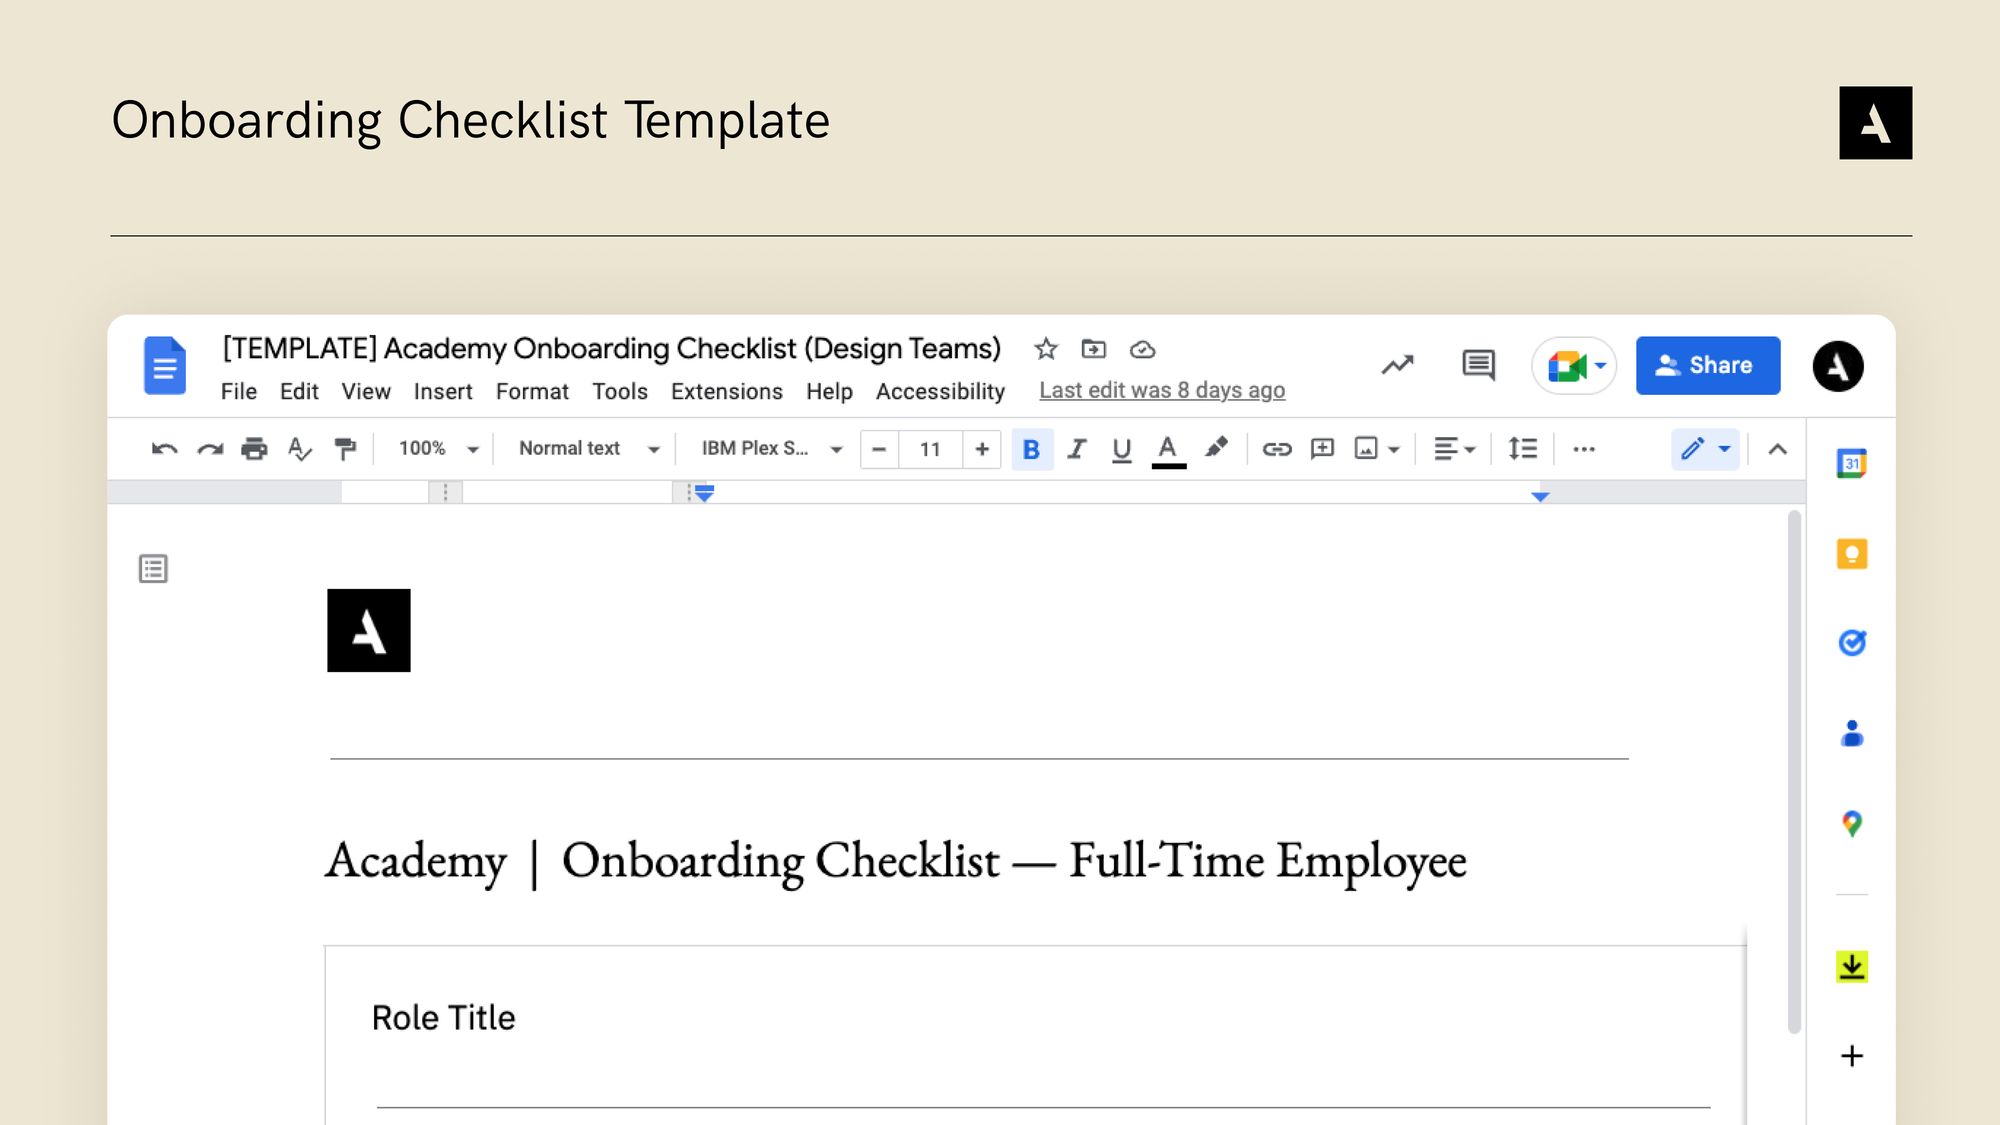 An Image of a onboarding checklist template